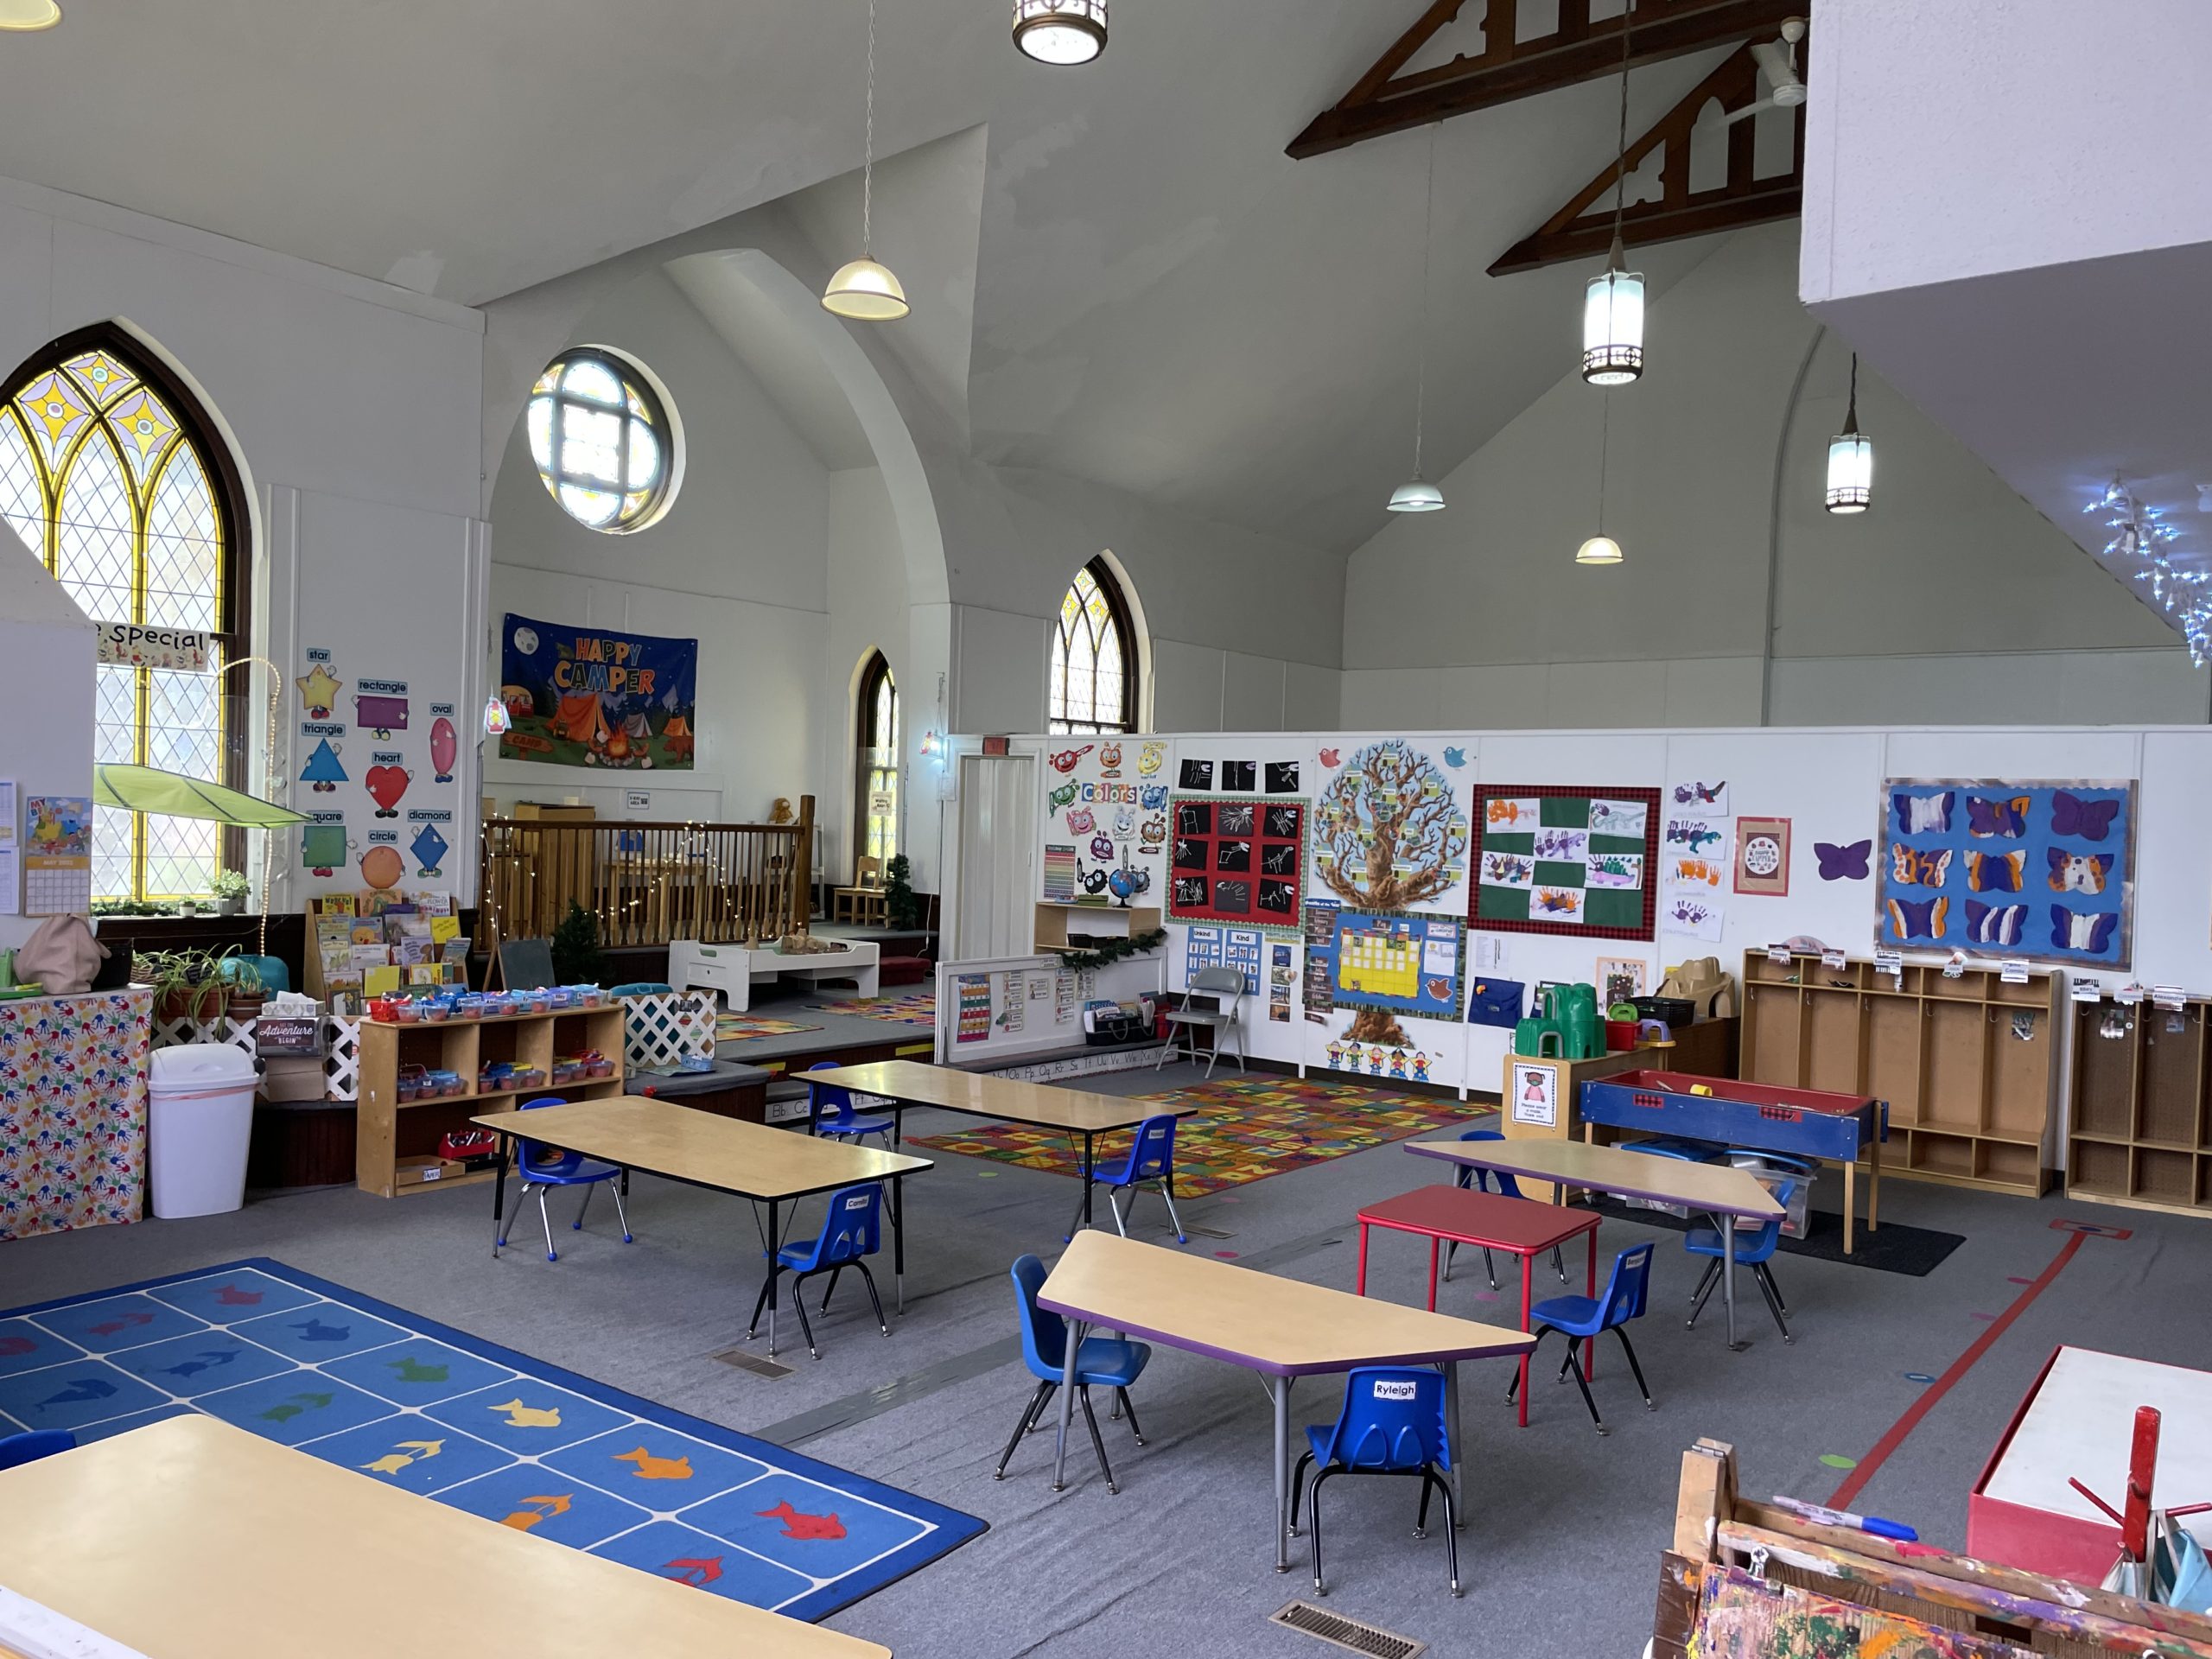 preschool classroom featuring toys, activities, and brightly colored artworks decorating the walls